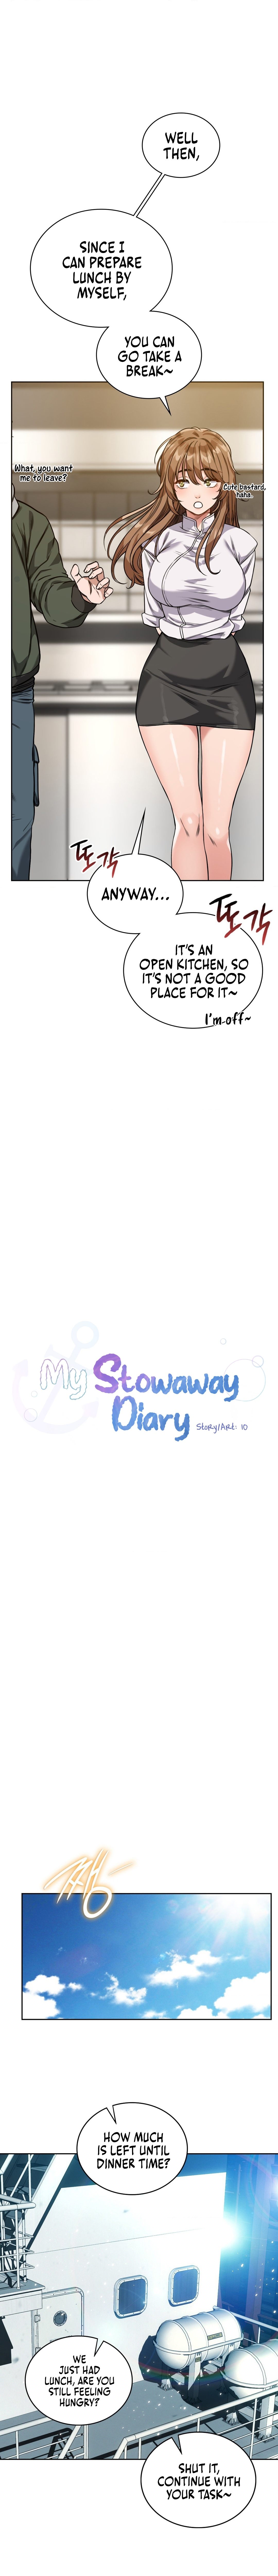 My Stowaway Diary - Chapter 3 Page 2